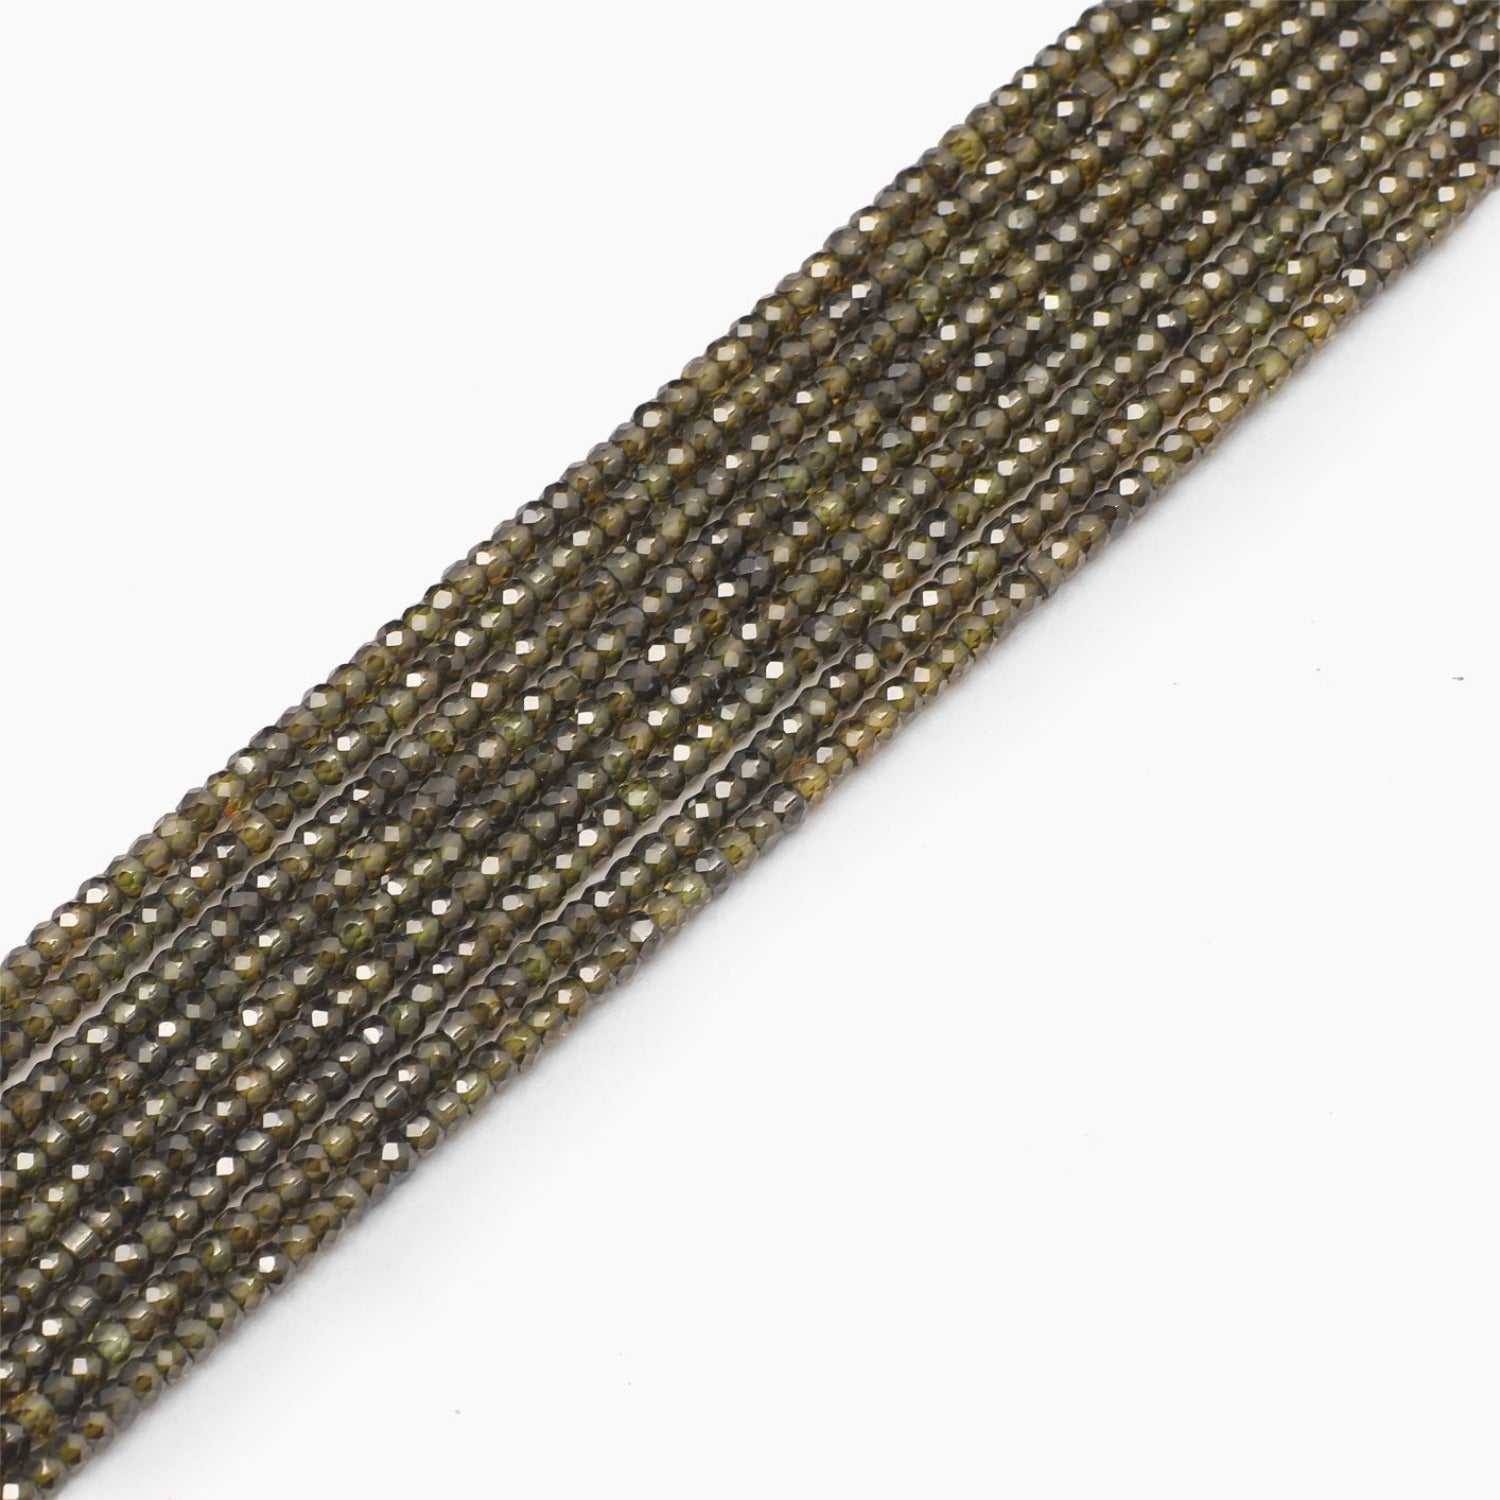 Dark Olive Faceted?ÿCubic?ÿZirconia?ÿBeads- Sold Per Strand